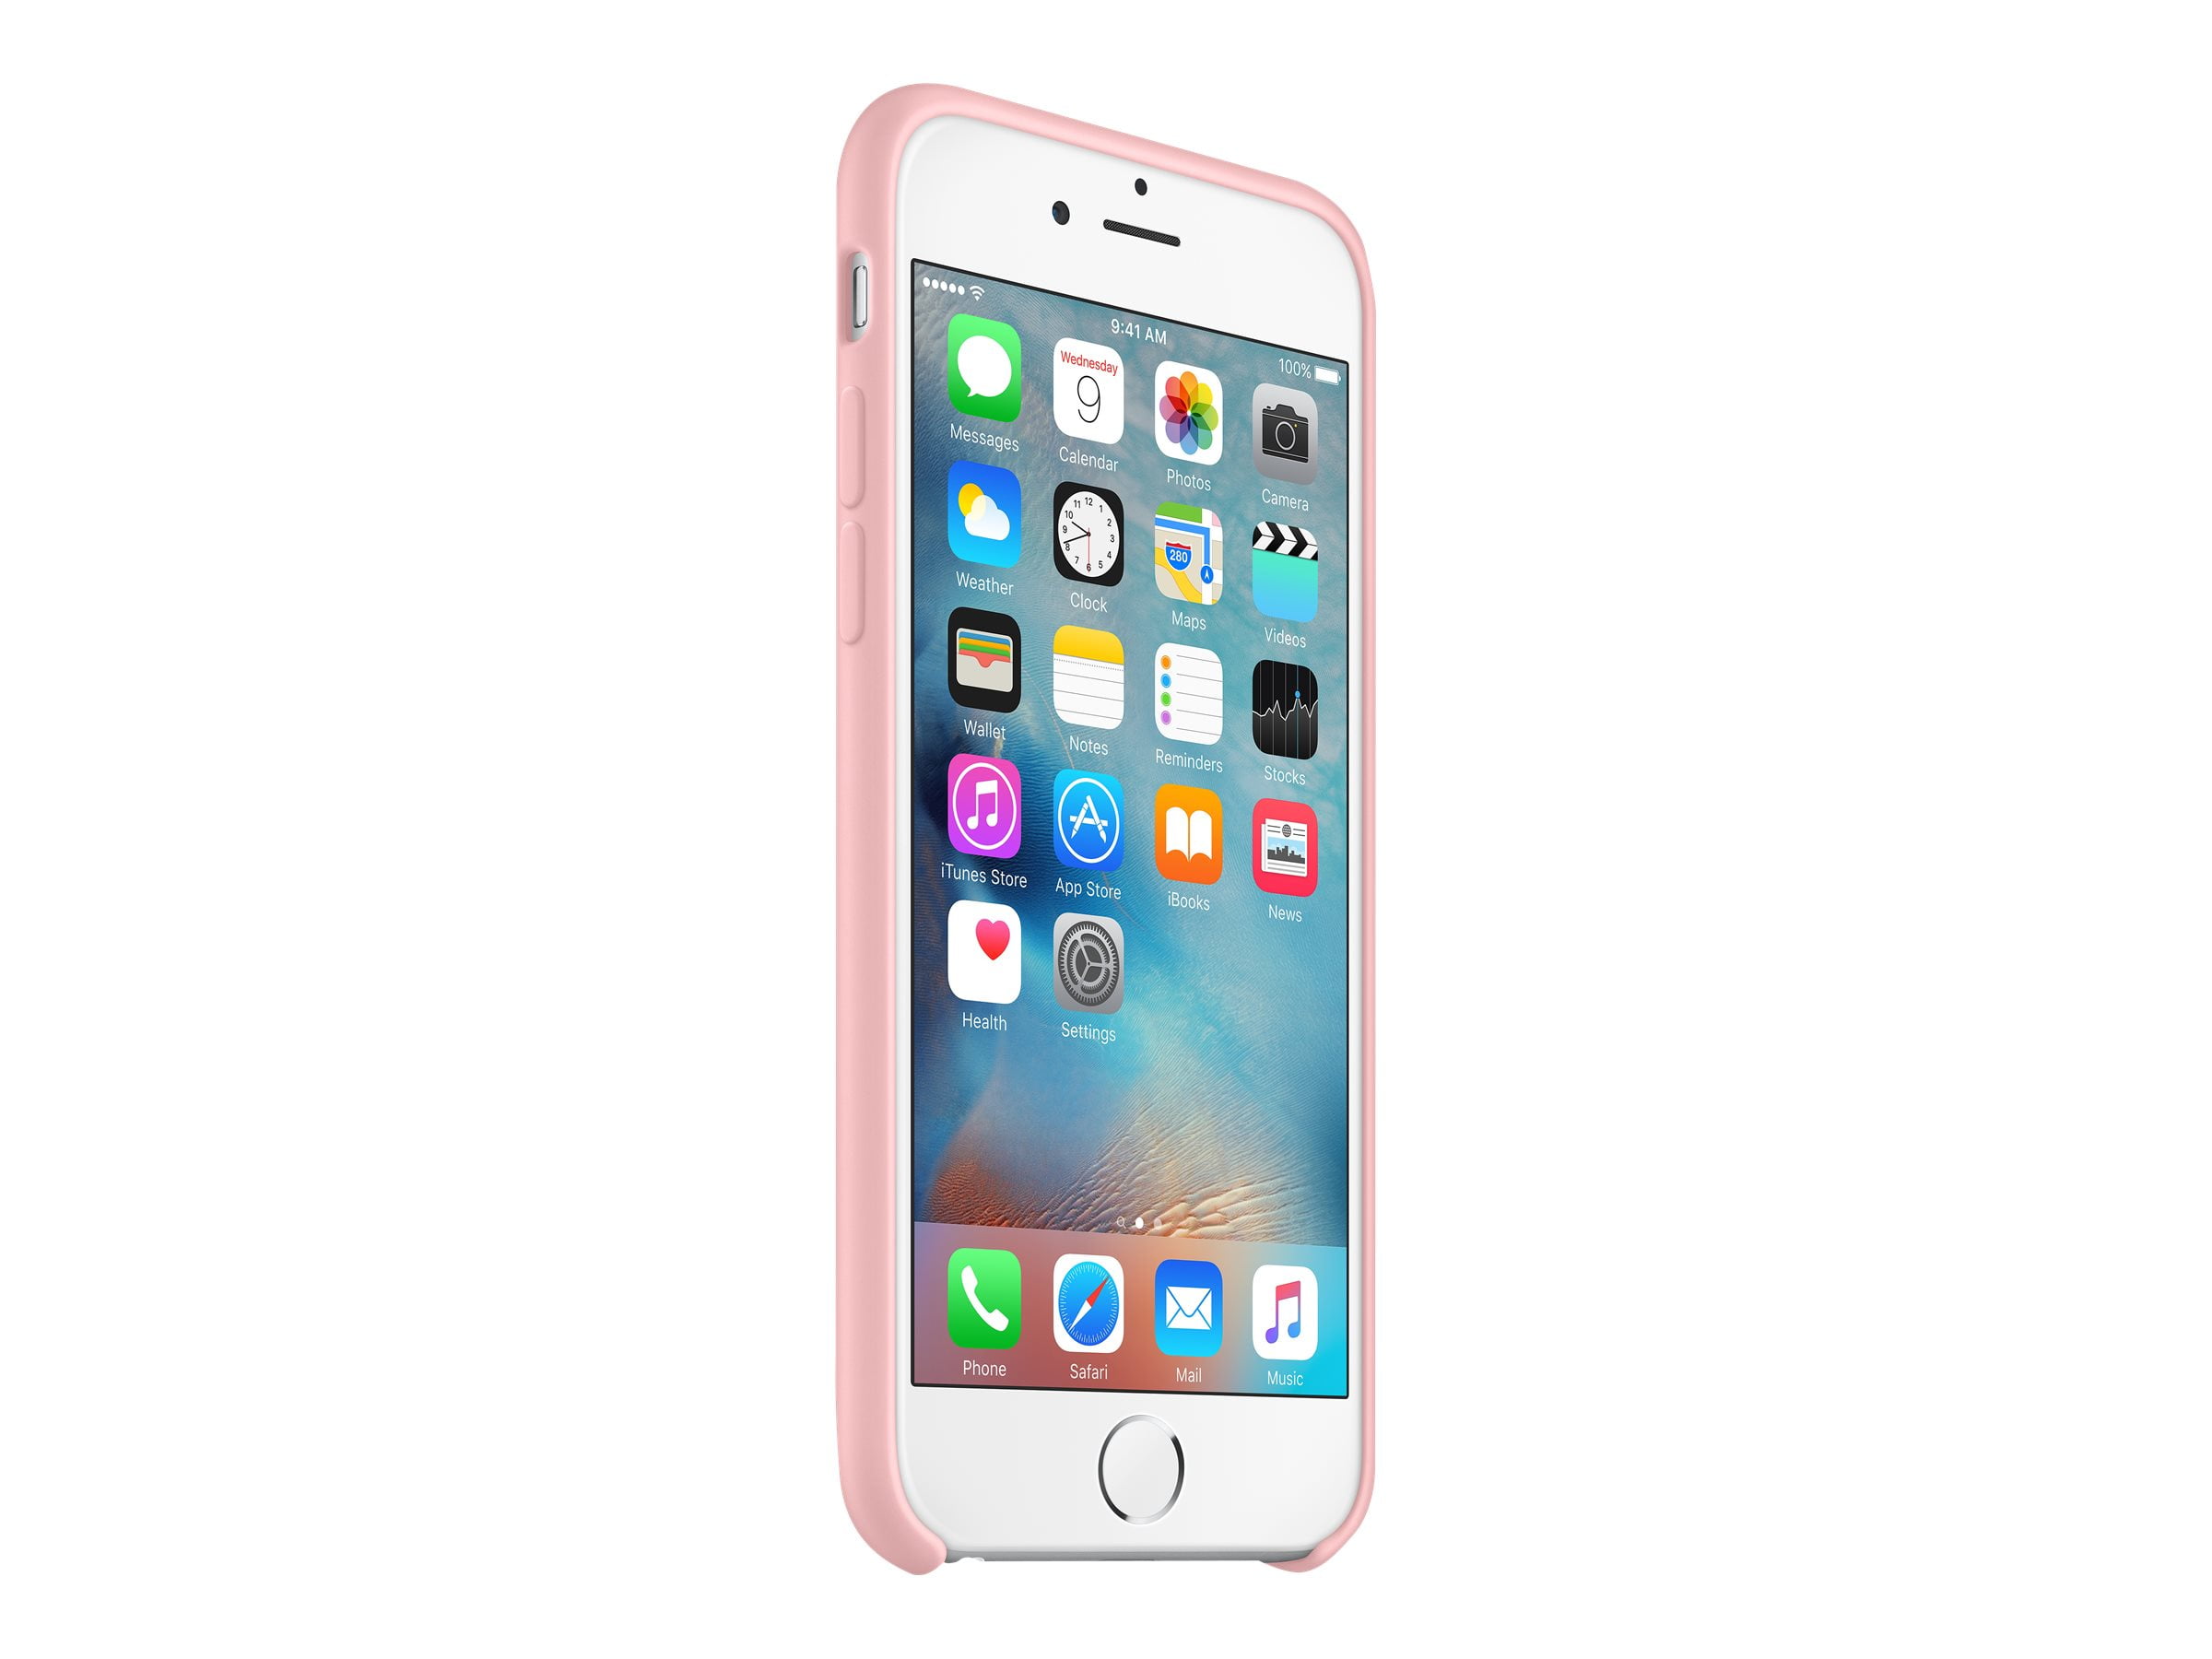 Apple Silicone Case for iPhone 6s - Pink Sand - Walmart.com - Walmart.com